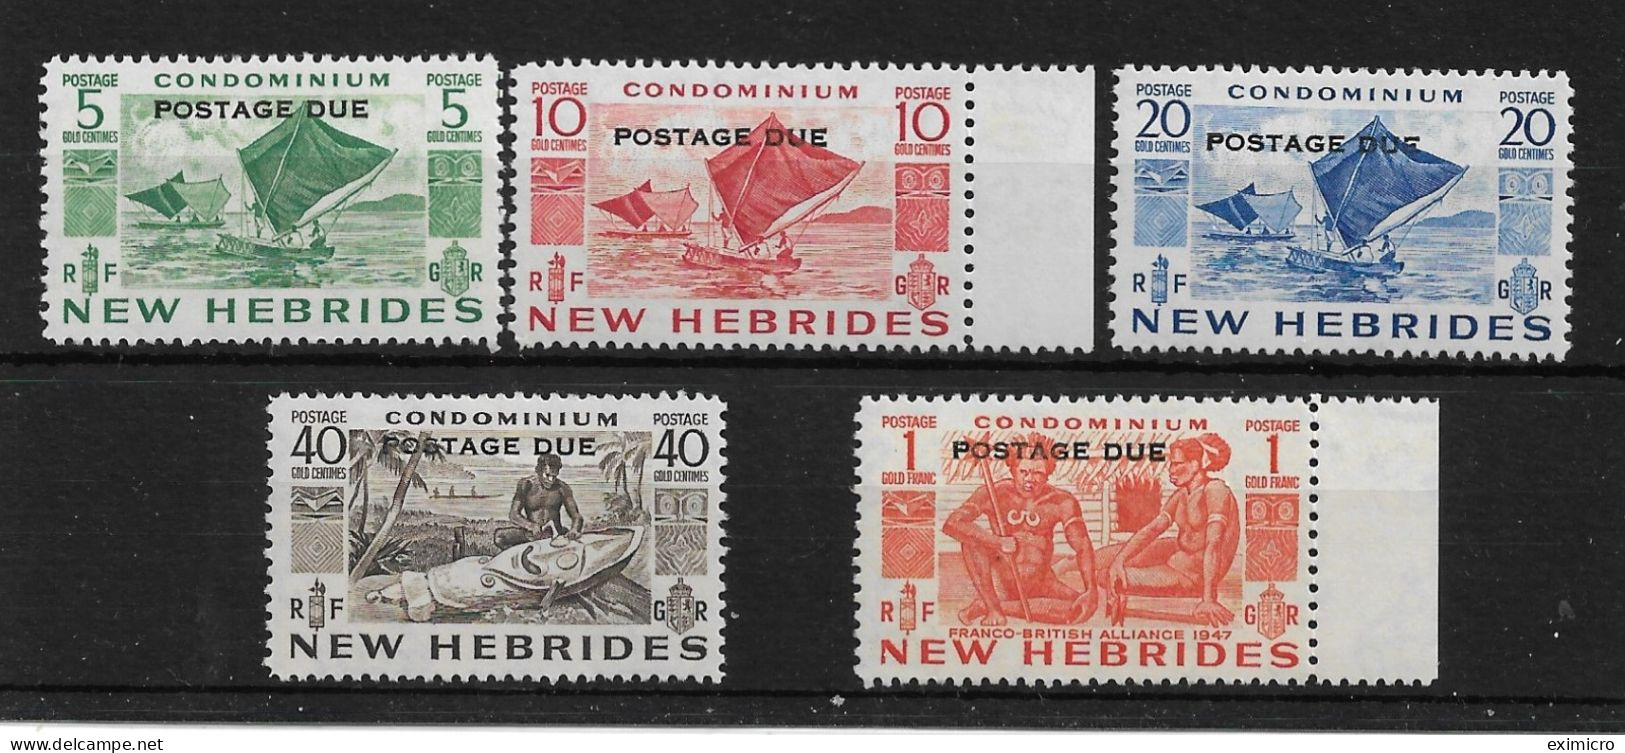 NEW HEBRIDES 1953 POSTAGE DUE SET SG D11/D15 UNMOUNTED MINT/VERY LIGHTLY MOUNTED MINT Cat £30 - Gebraucht